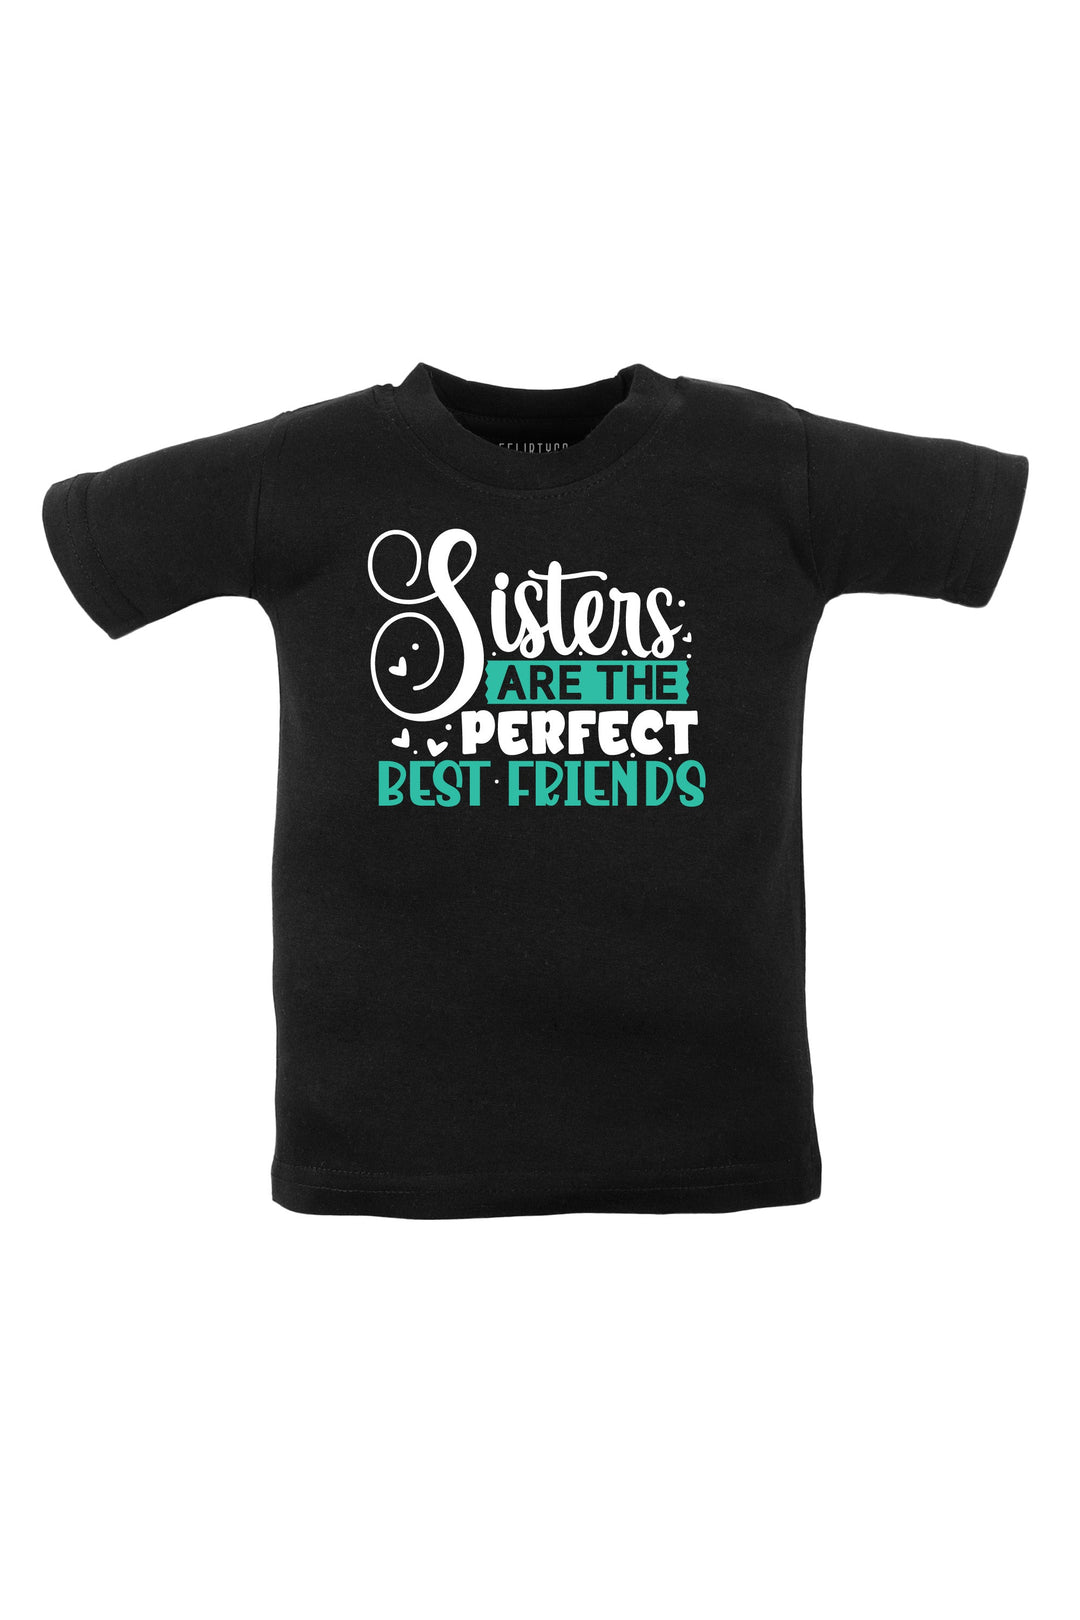 Sisters Are The Perfect Best Friends KIDS T SHIRT